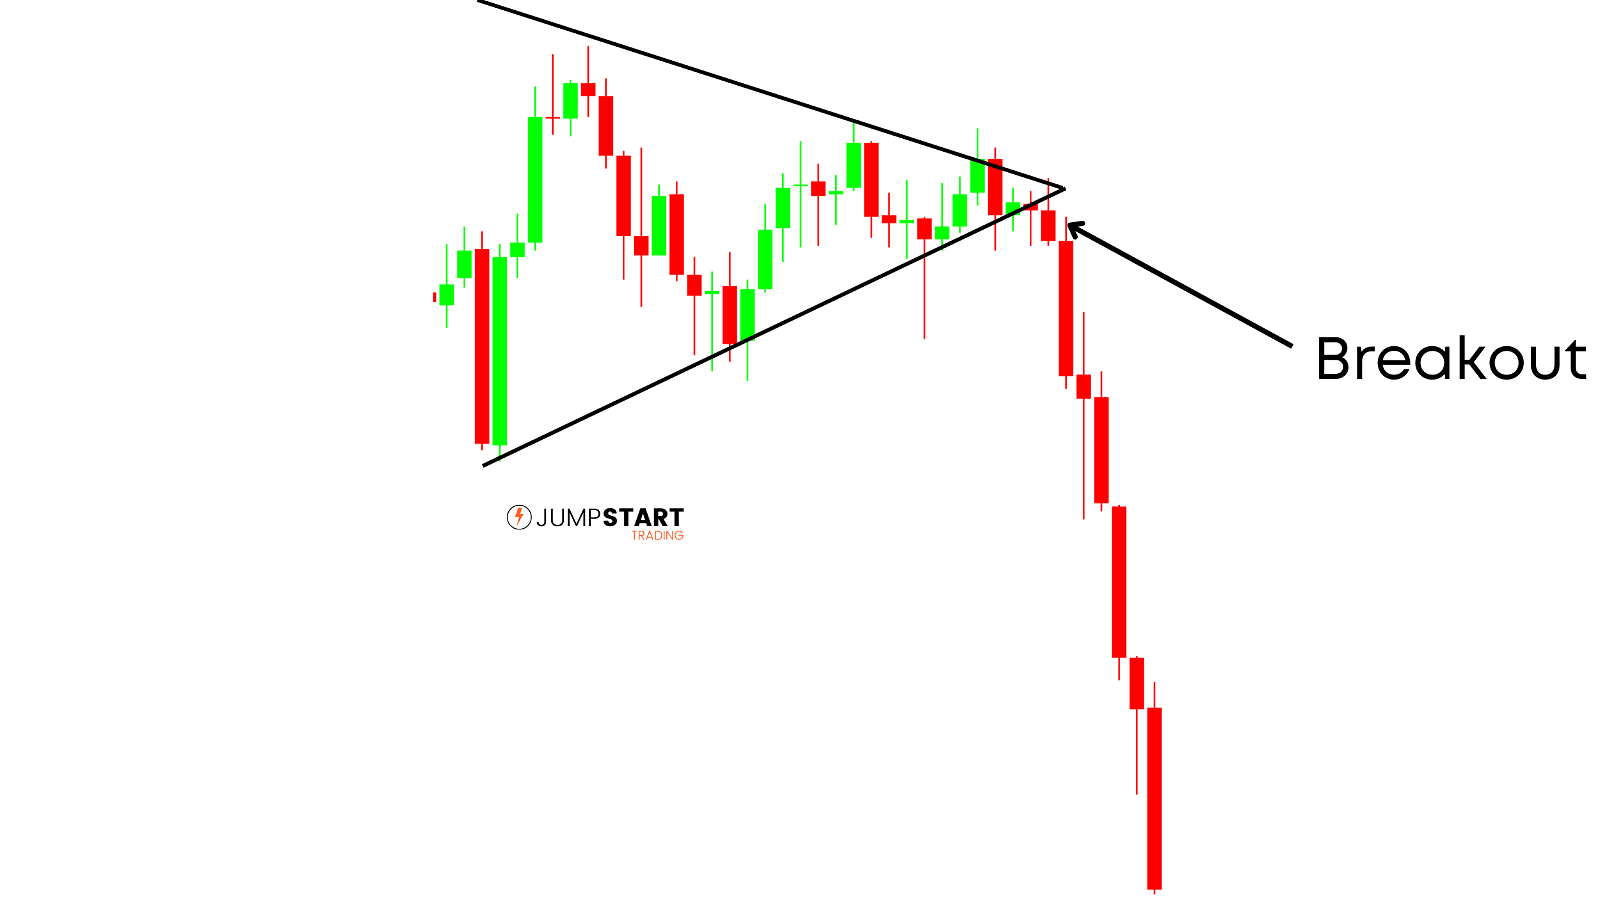 Price consolidating into symmetrical triangle then breaking out to the downside